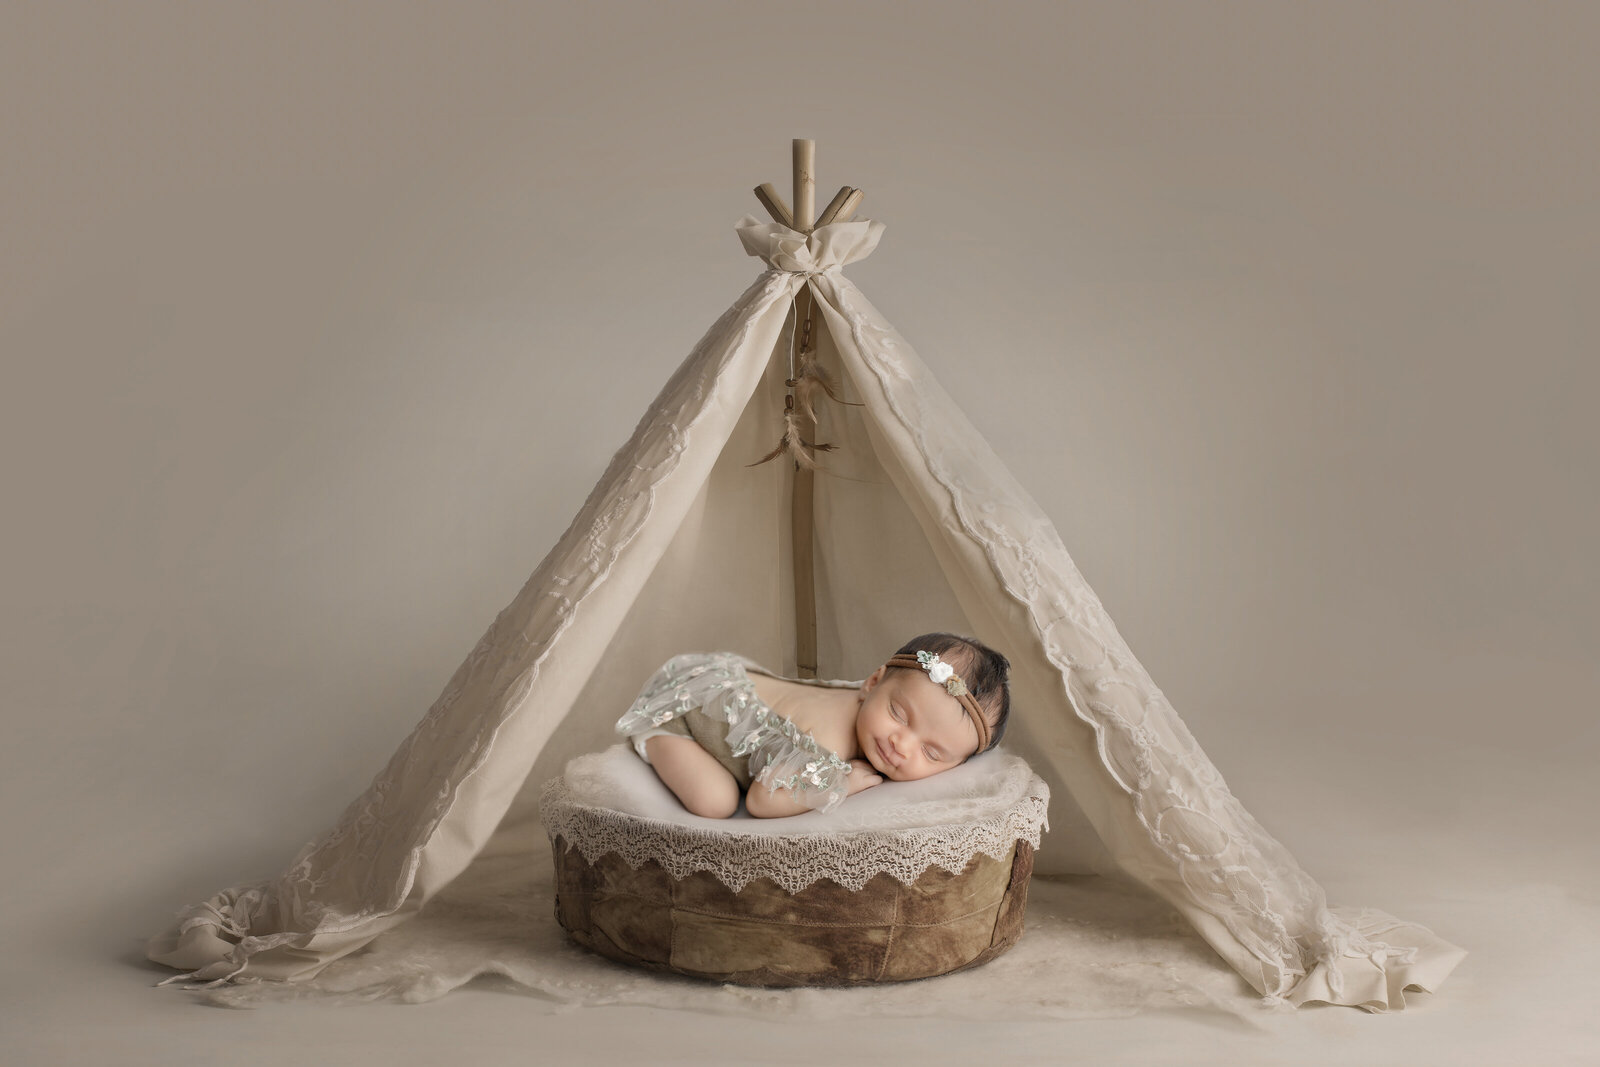 Cream Lace Teepee - Lilley Belle Couture